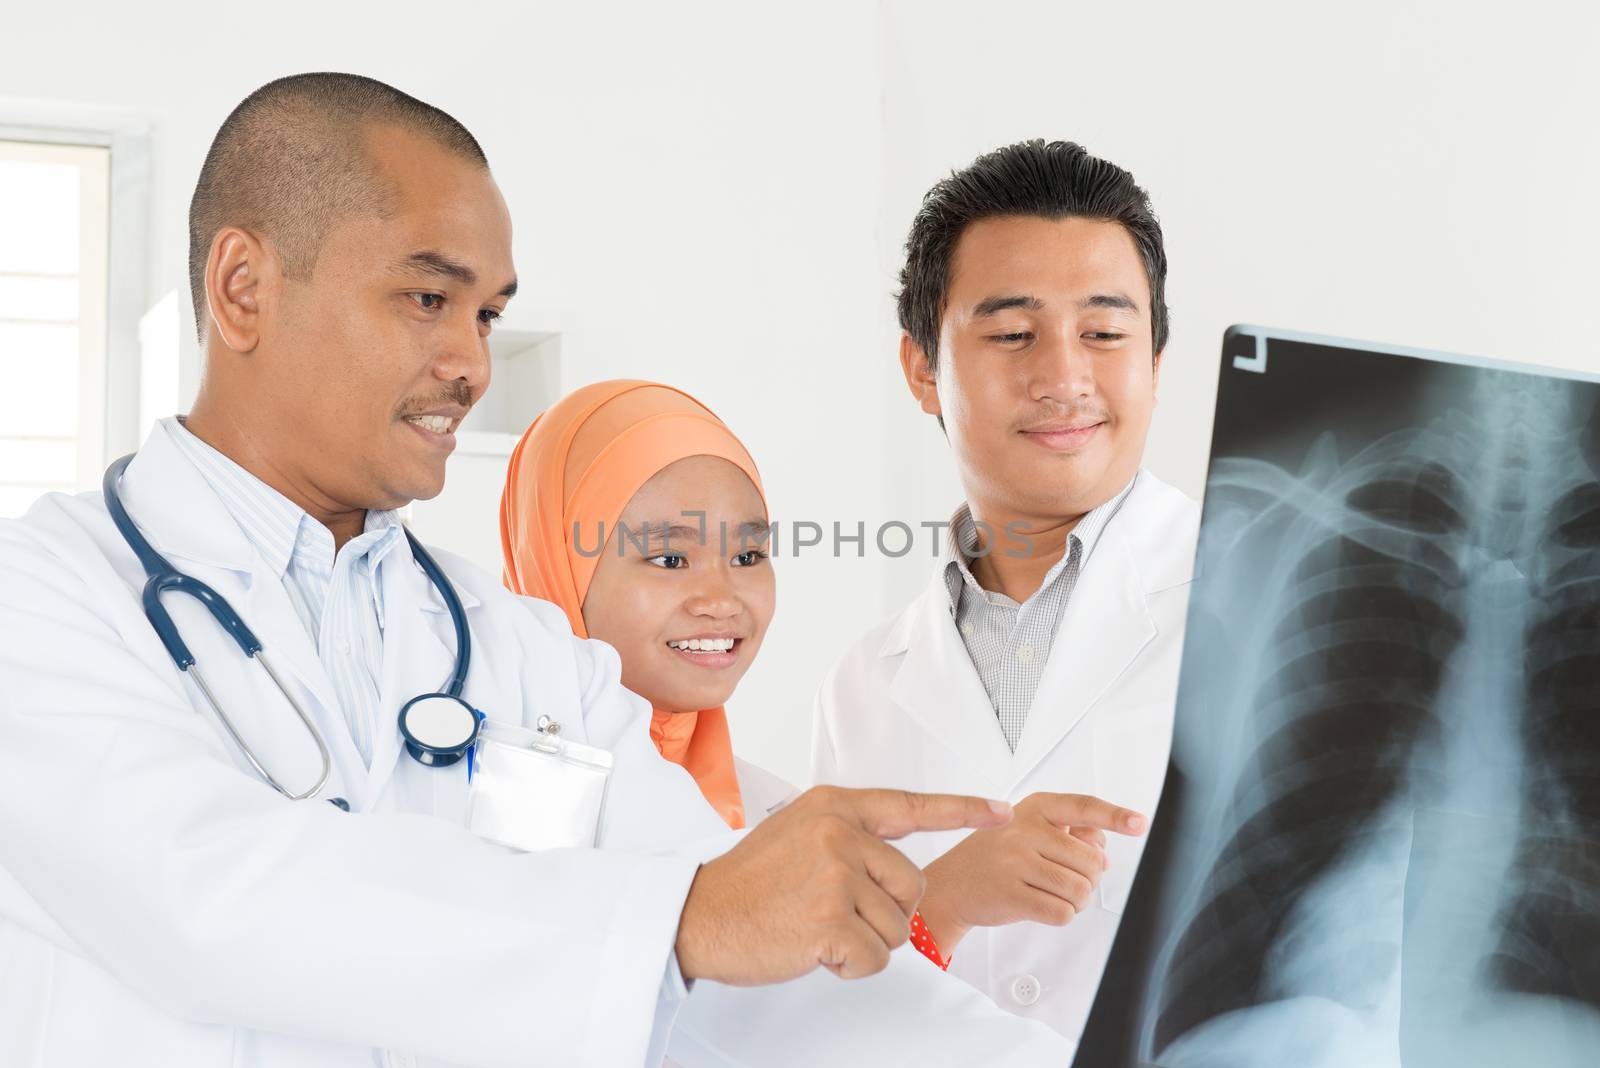 Group of doctors analyzing x-ray together in medical office. Southeast Asian Muslim people.